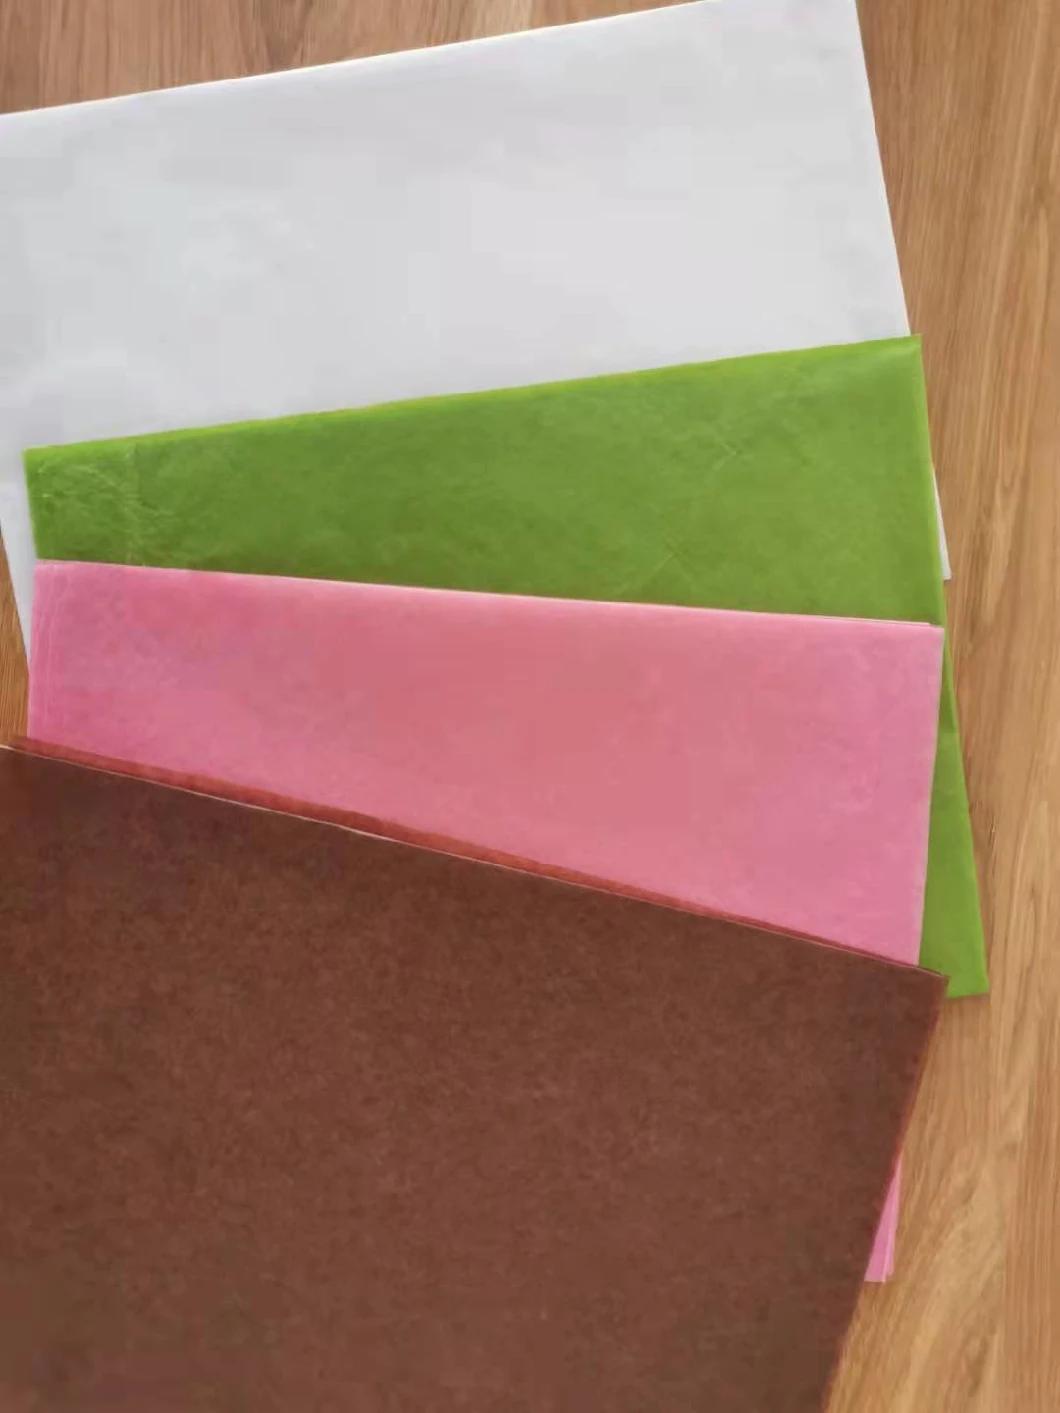 24-40GSM Color Glassine Paper Factory Whole Sales for Packing